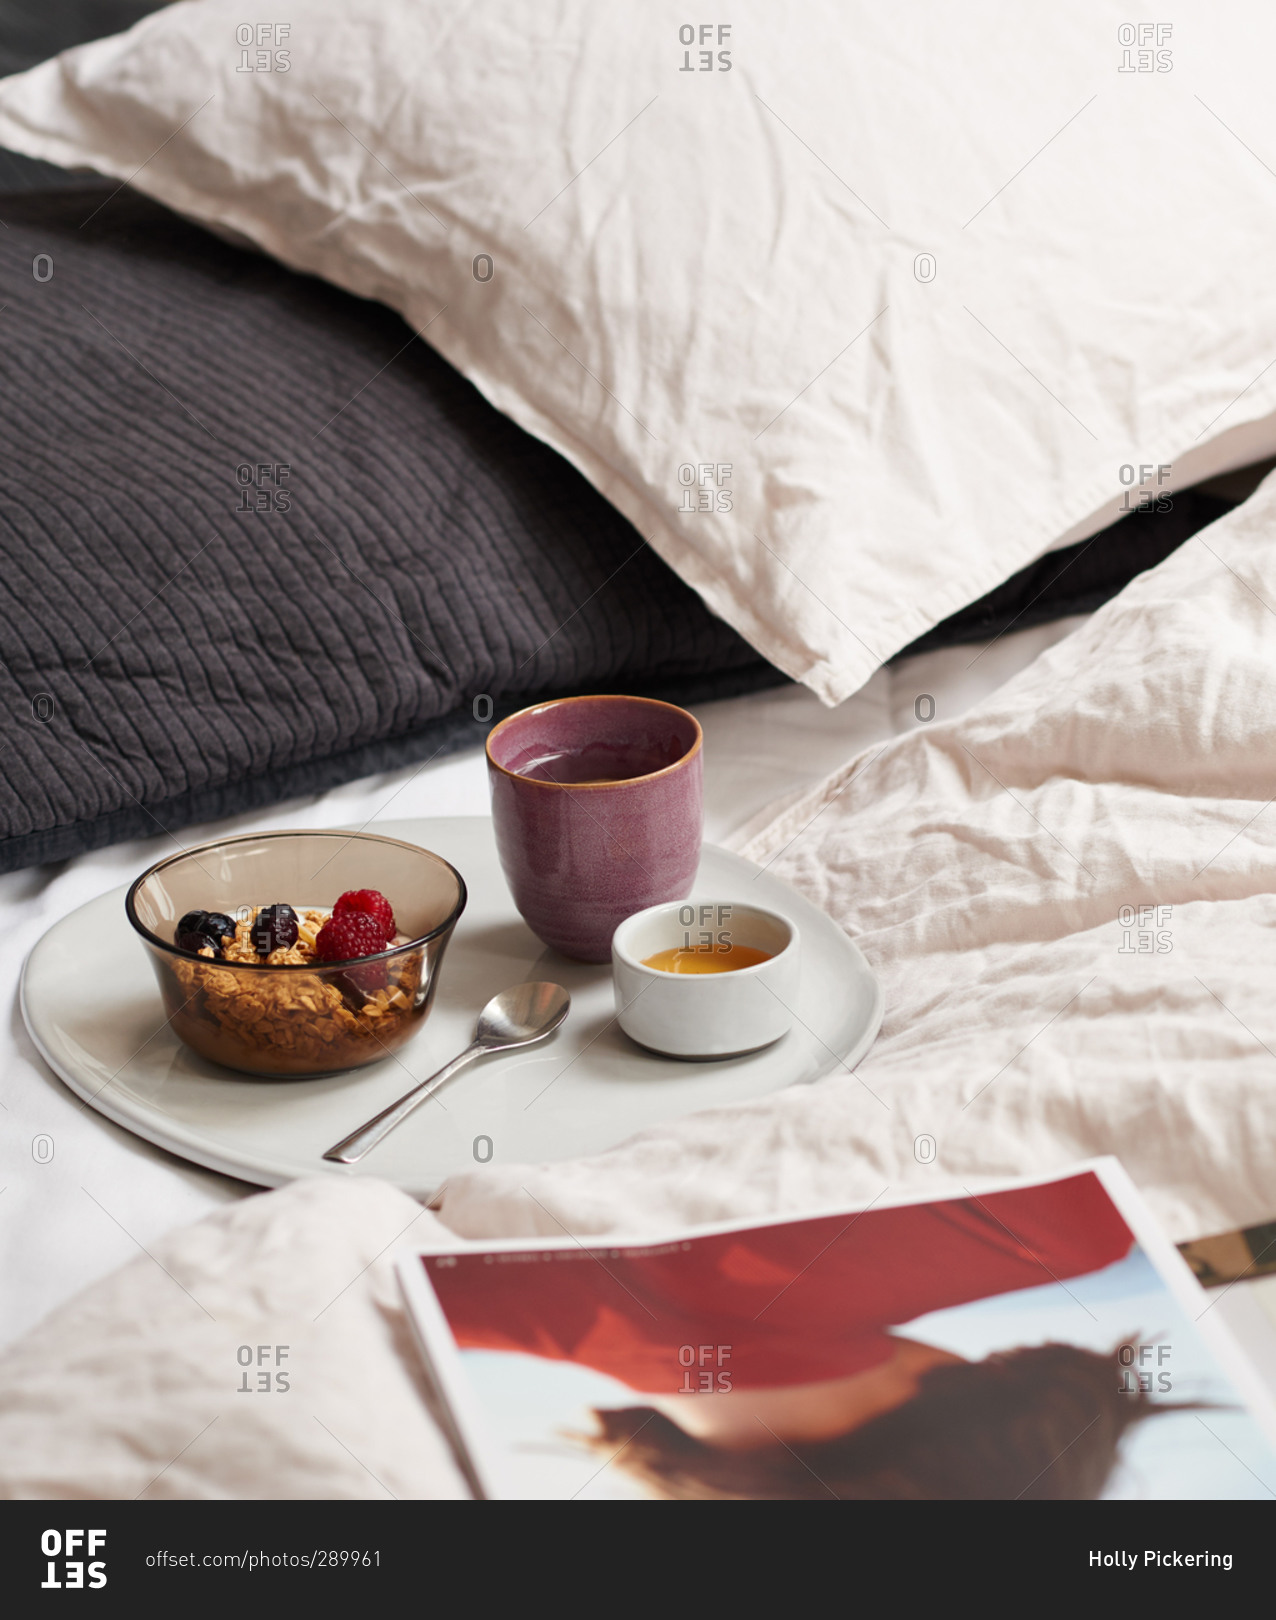 Breakfast tray of granola on a bed with bedding and pillows